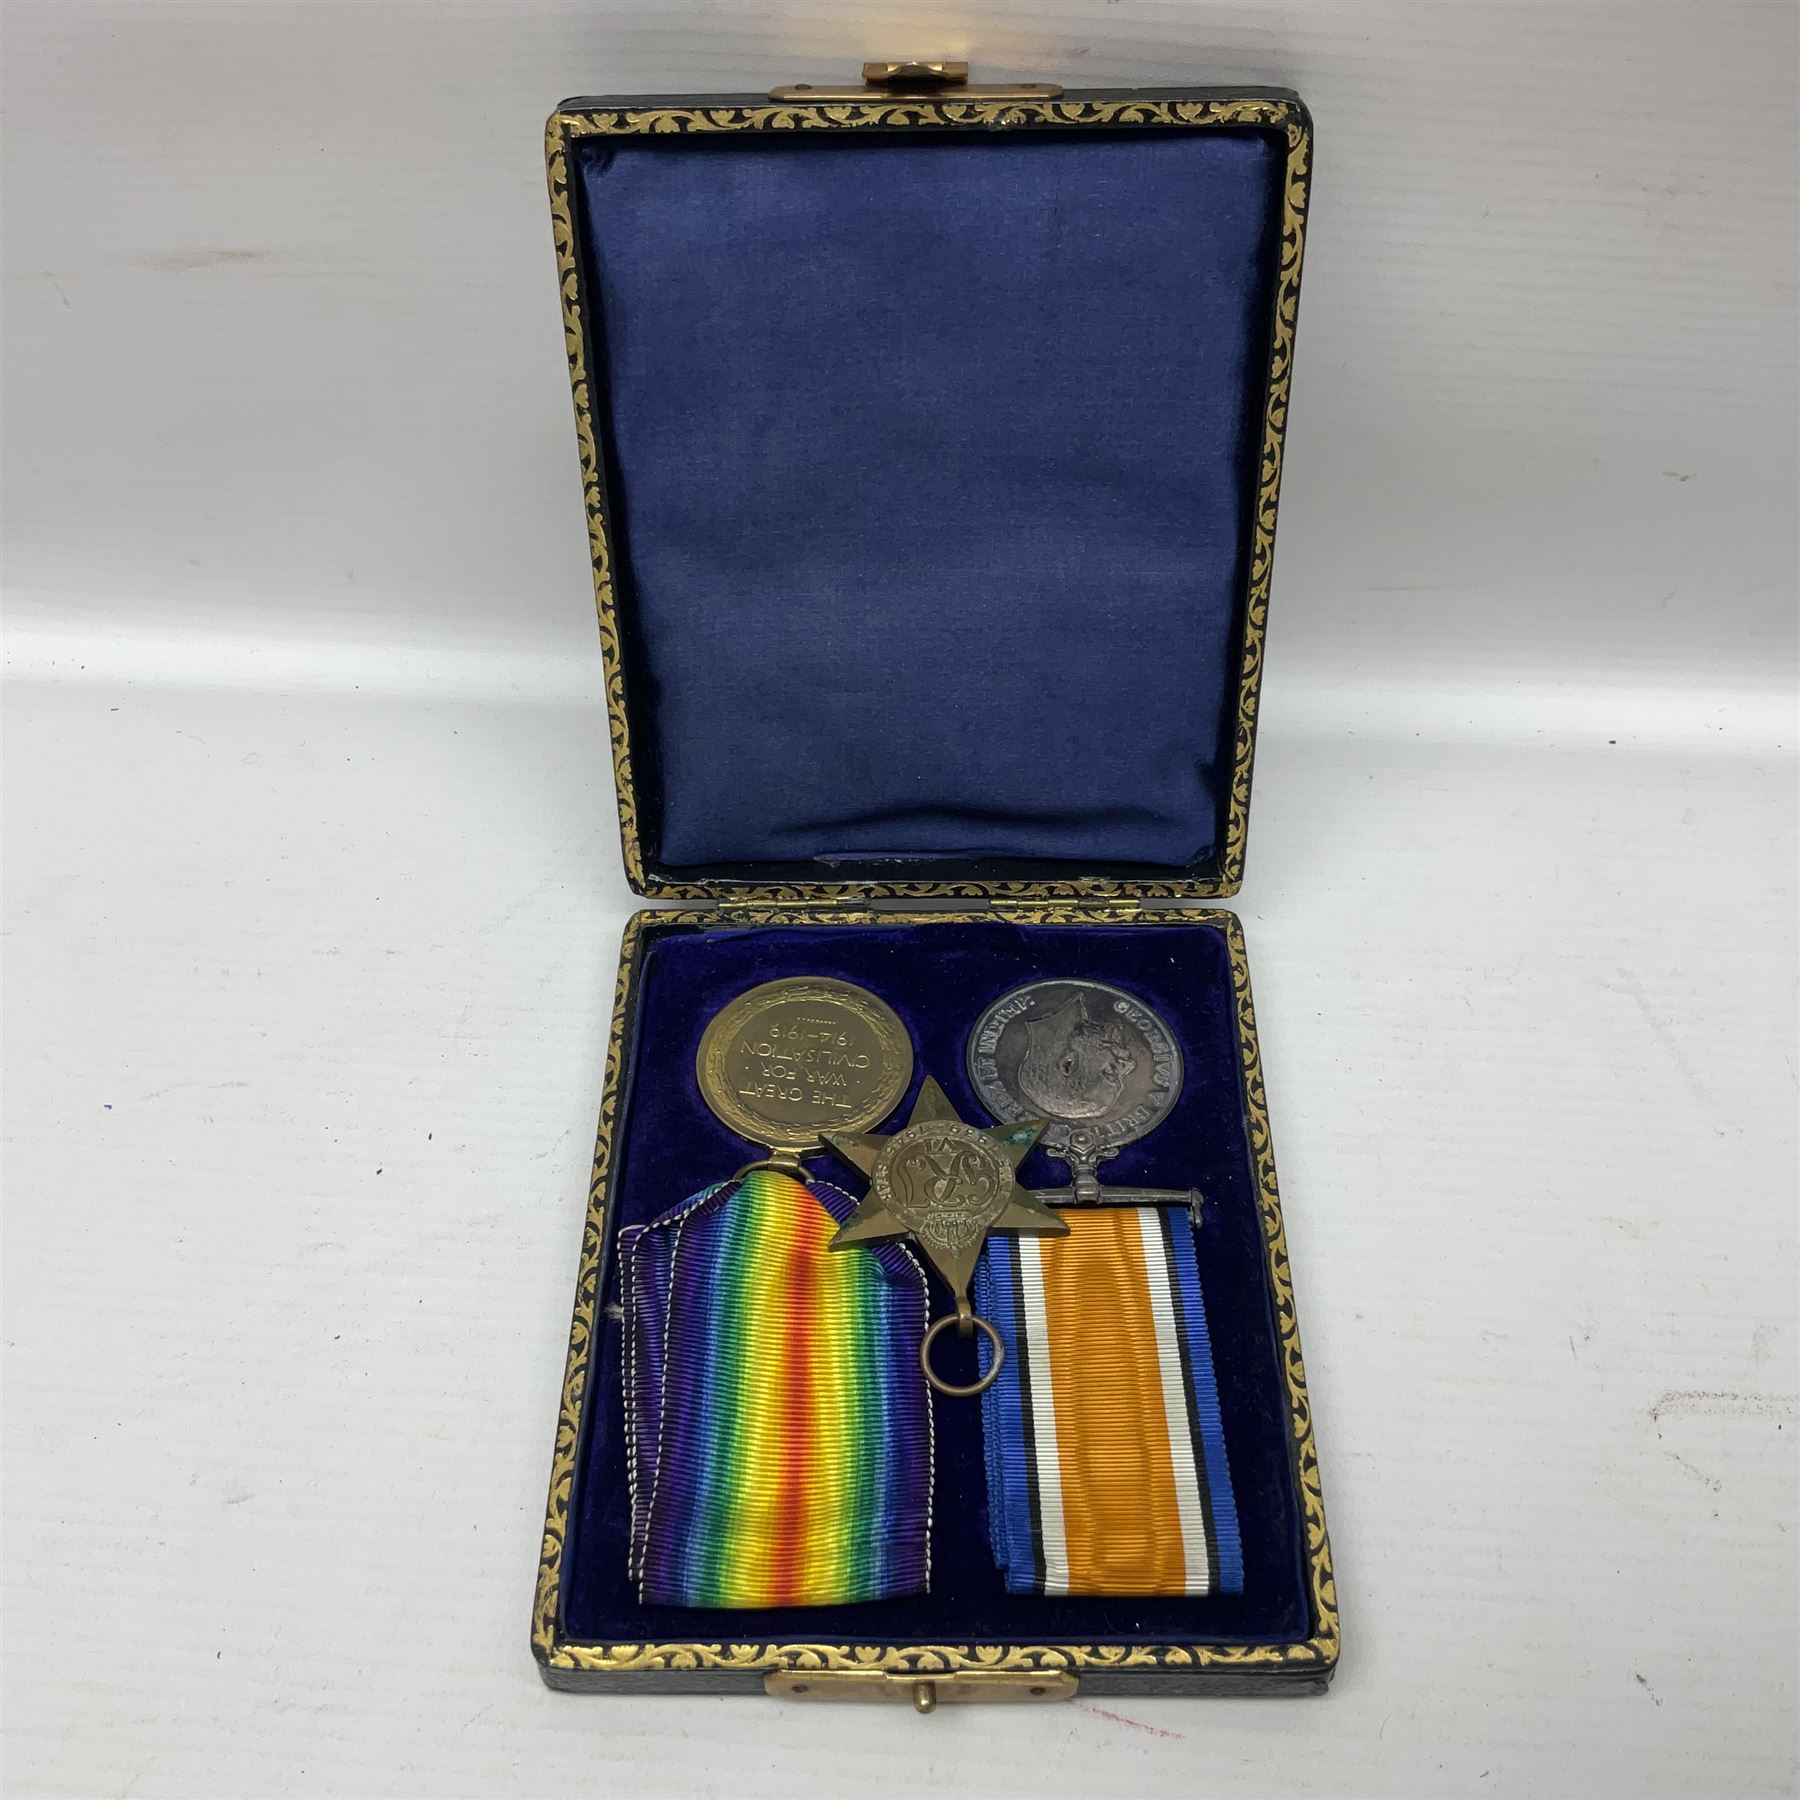 WWI pair of medals comprising British War Medal and Victory Medal awarded to 12-1379 Pte. H. Marshal - Image 16 of 18